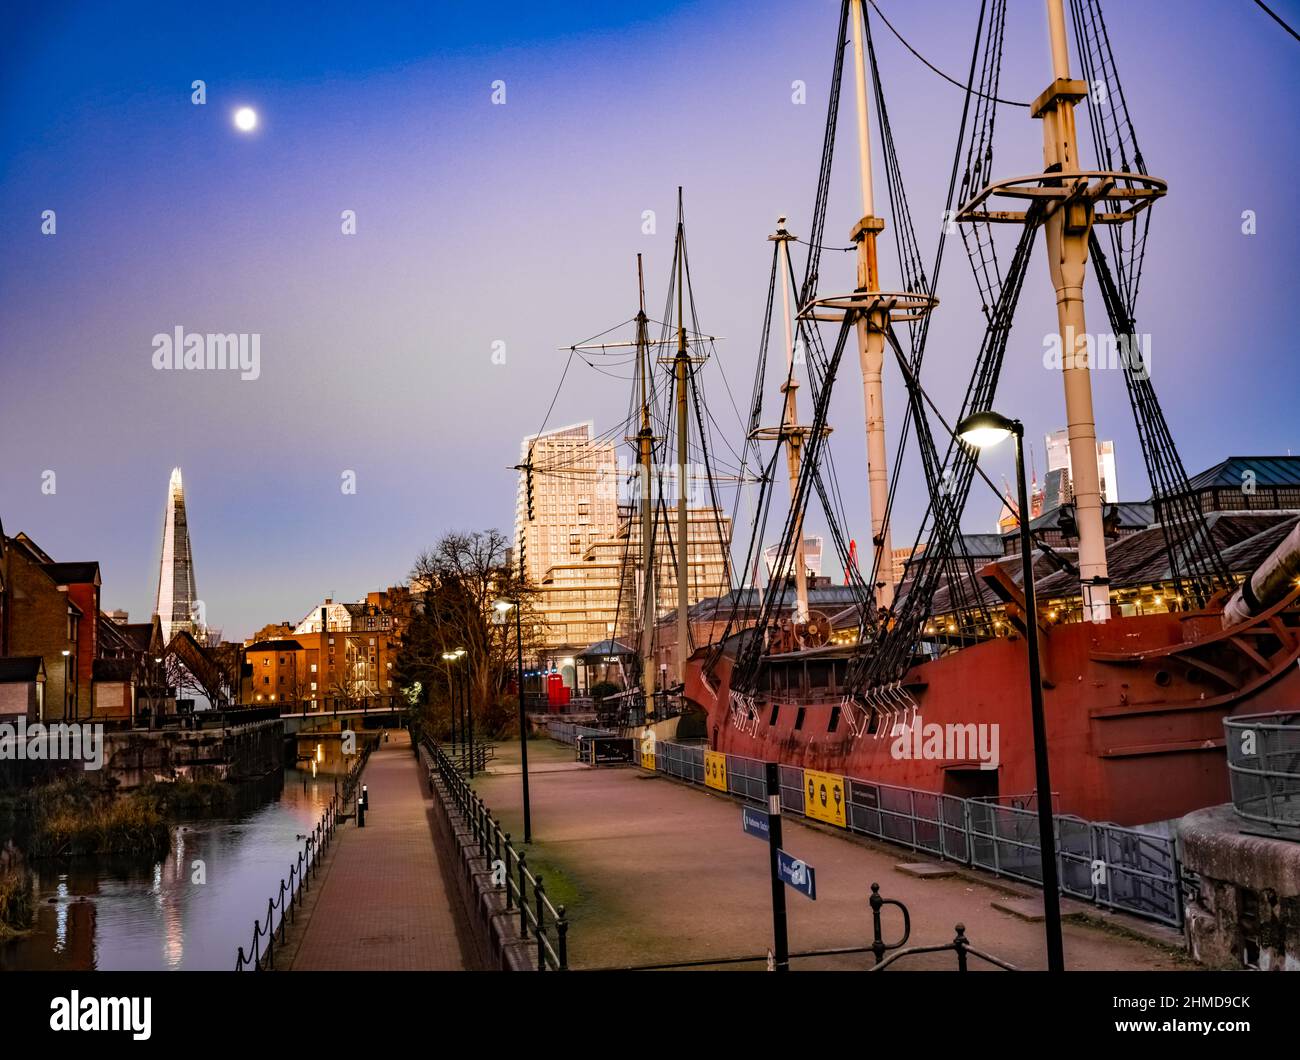 Tabacco Dock dusk, pirate ship, with full moon and Shard. Stock Photo